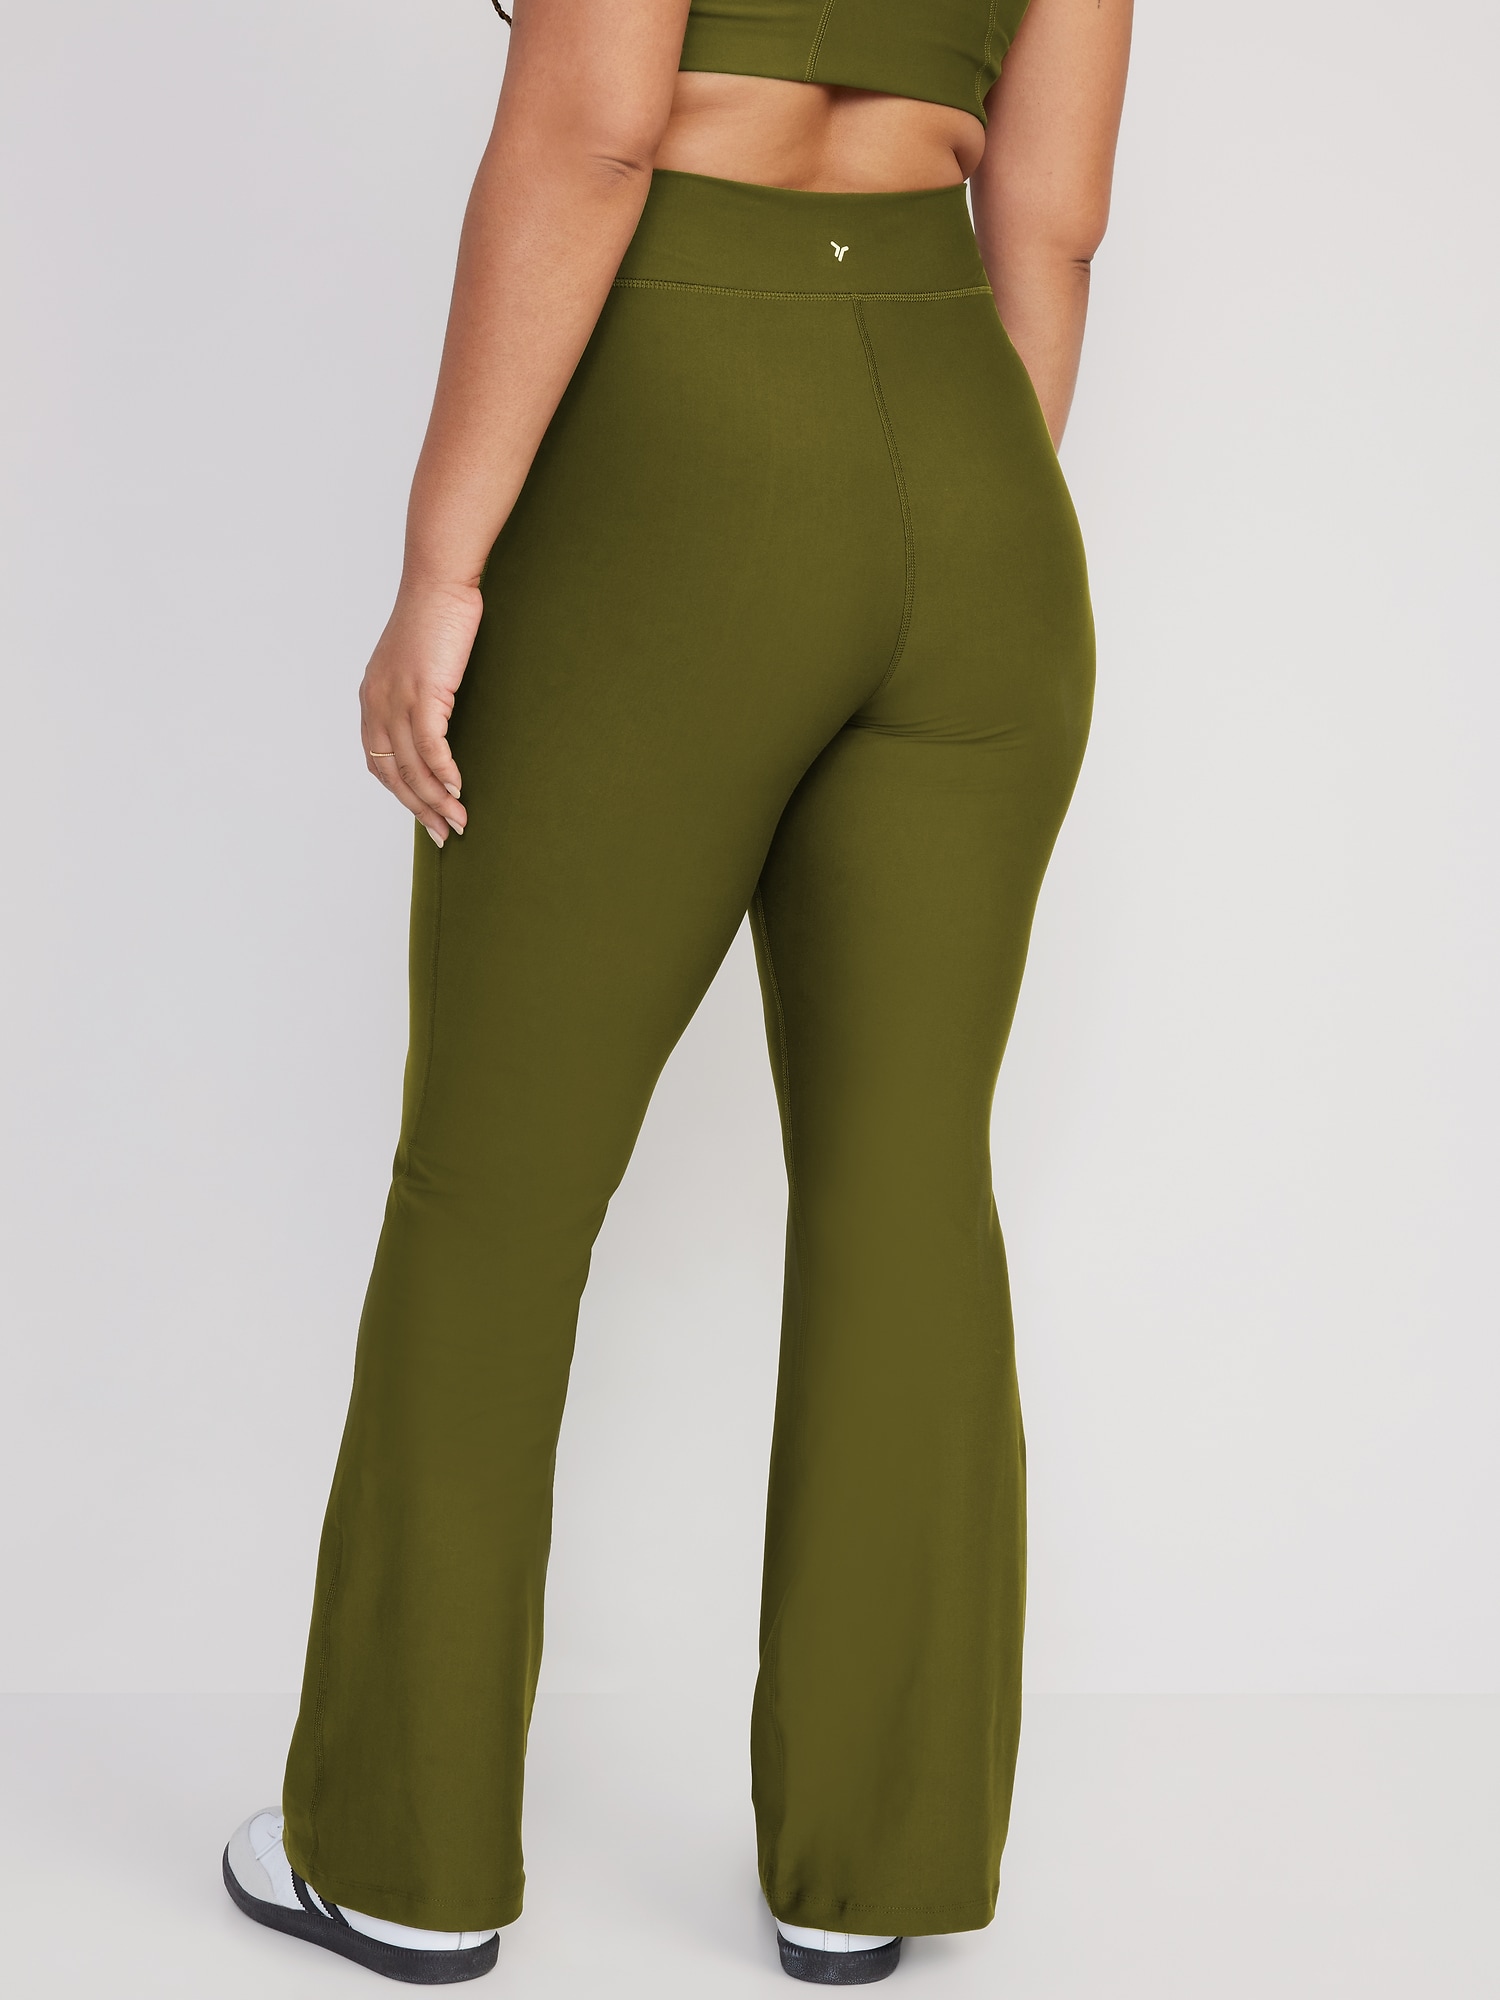 SHEIN Flare Leg Rib-knit Pants  Flared pants outfit, Green flare